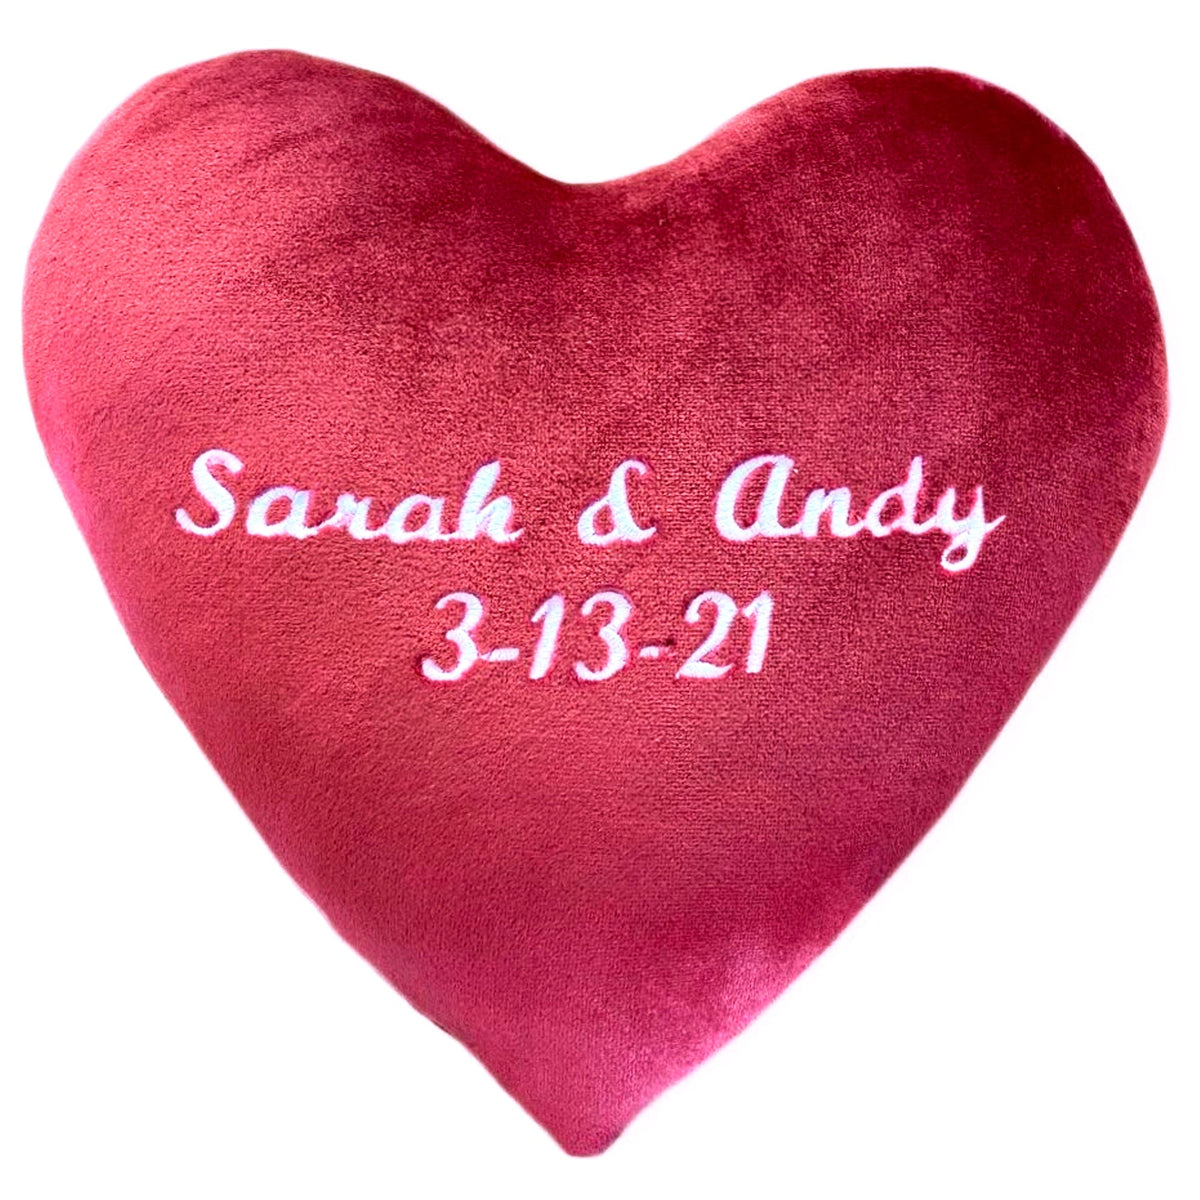 &quot;Sarah &amp; Andy 3-13-21&quot; Embroidered red heart pillow - luster loft fleece heart pillow - Luster Loft Fleece - American Blanket Company